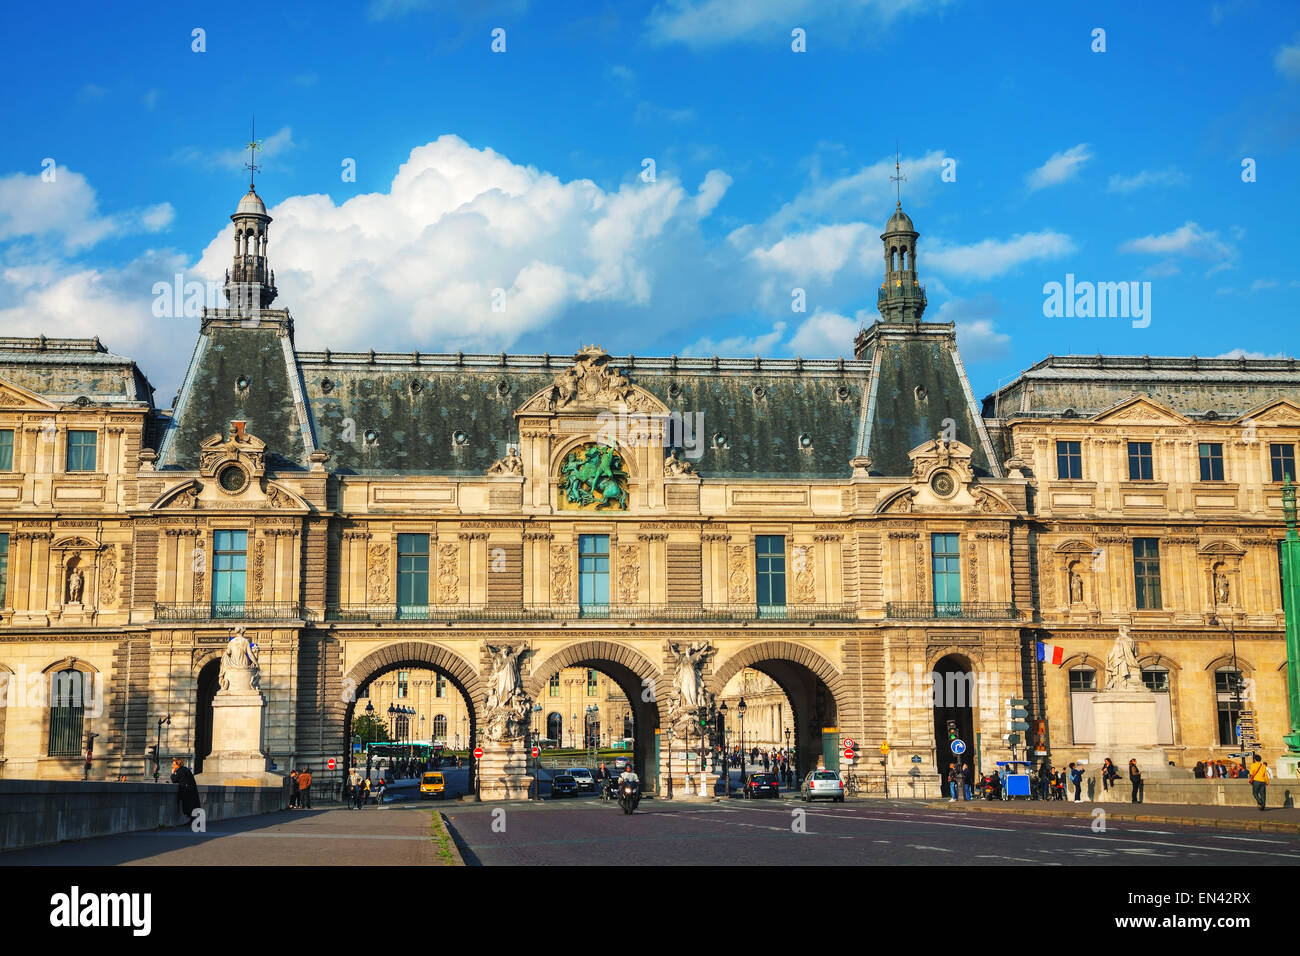 PARIS - OCTOBER 9: Entrance to the Louvre on October 9, 2014 in Paris, France. The Louvre Museum is one of the world's largest m Stock Photo